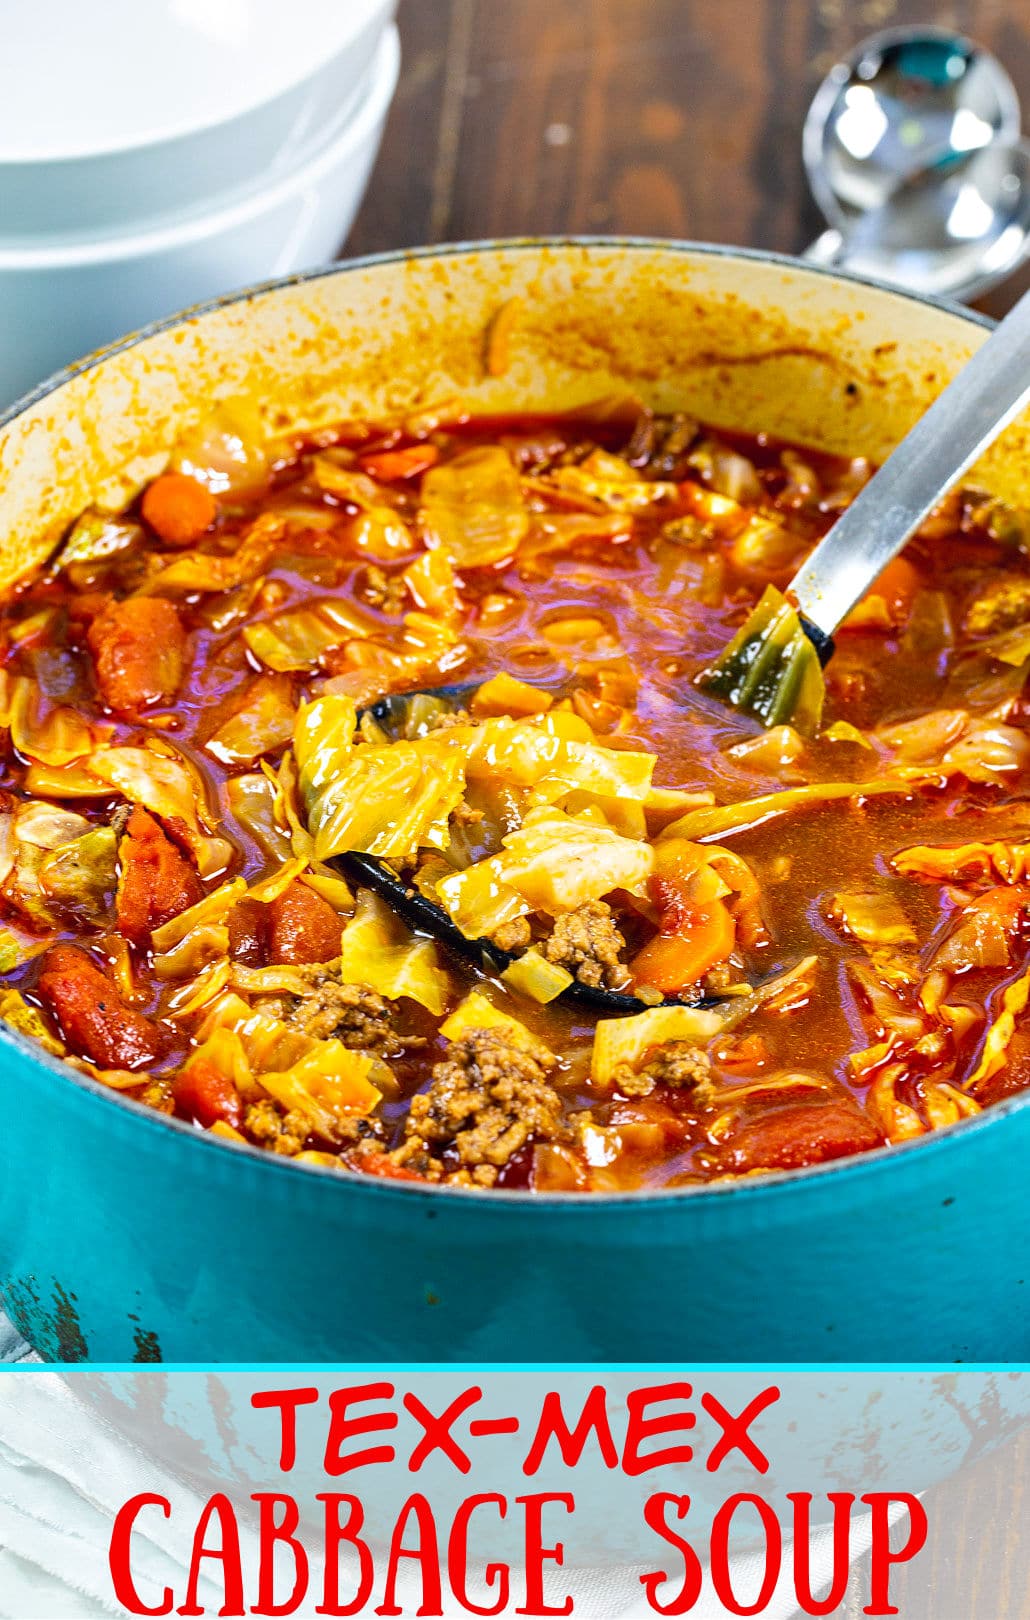 Tex-Mex Cabbage Soup in blue Dutch oven.